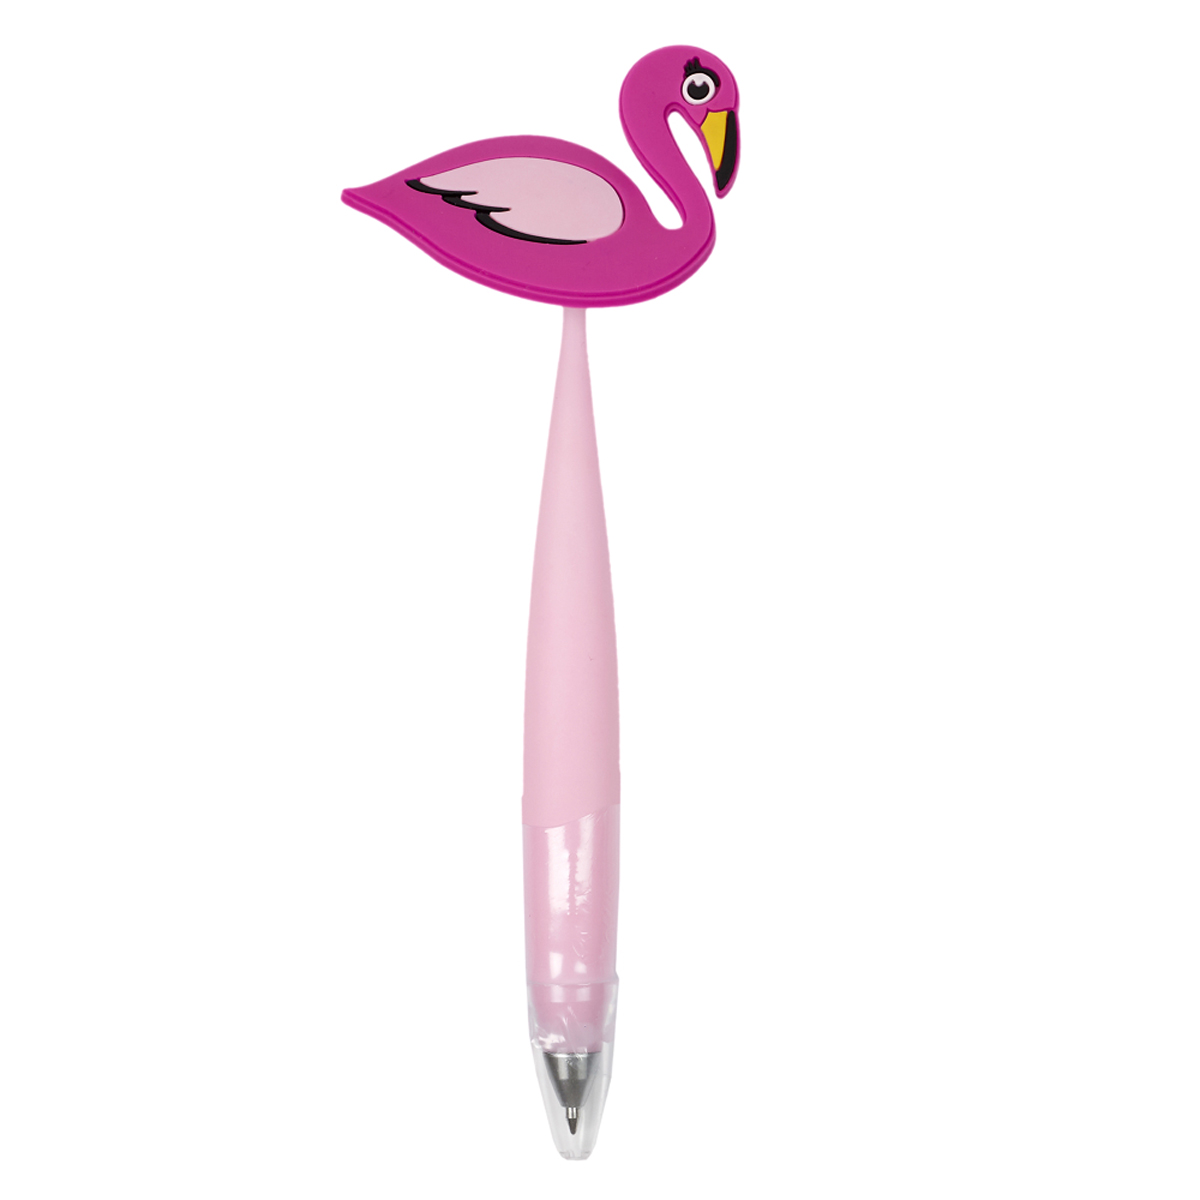 Stylo fantaisie \'Flamant Rose\' rose - 165 mm - [A1679]